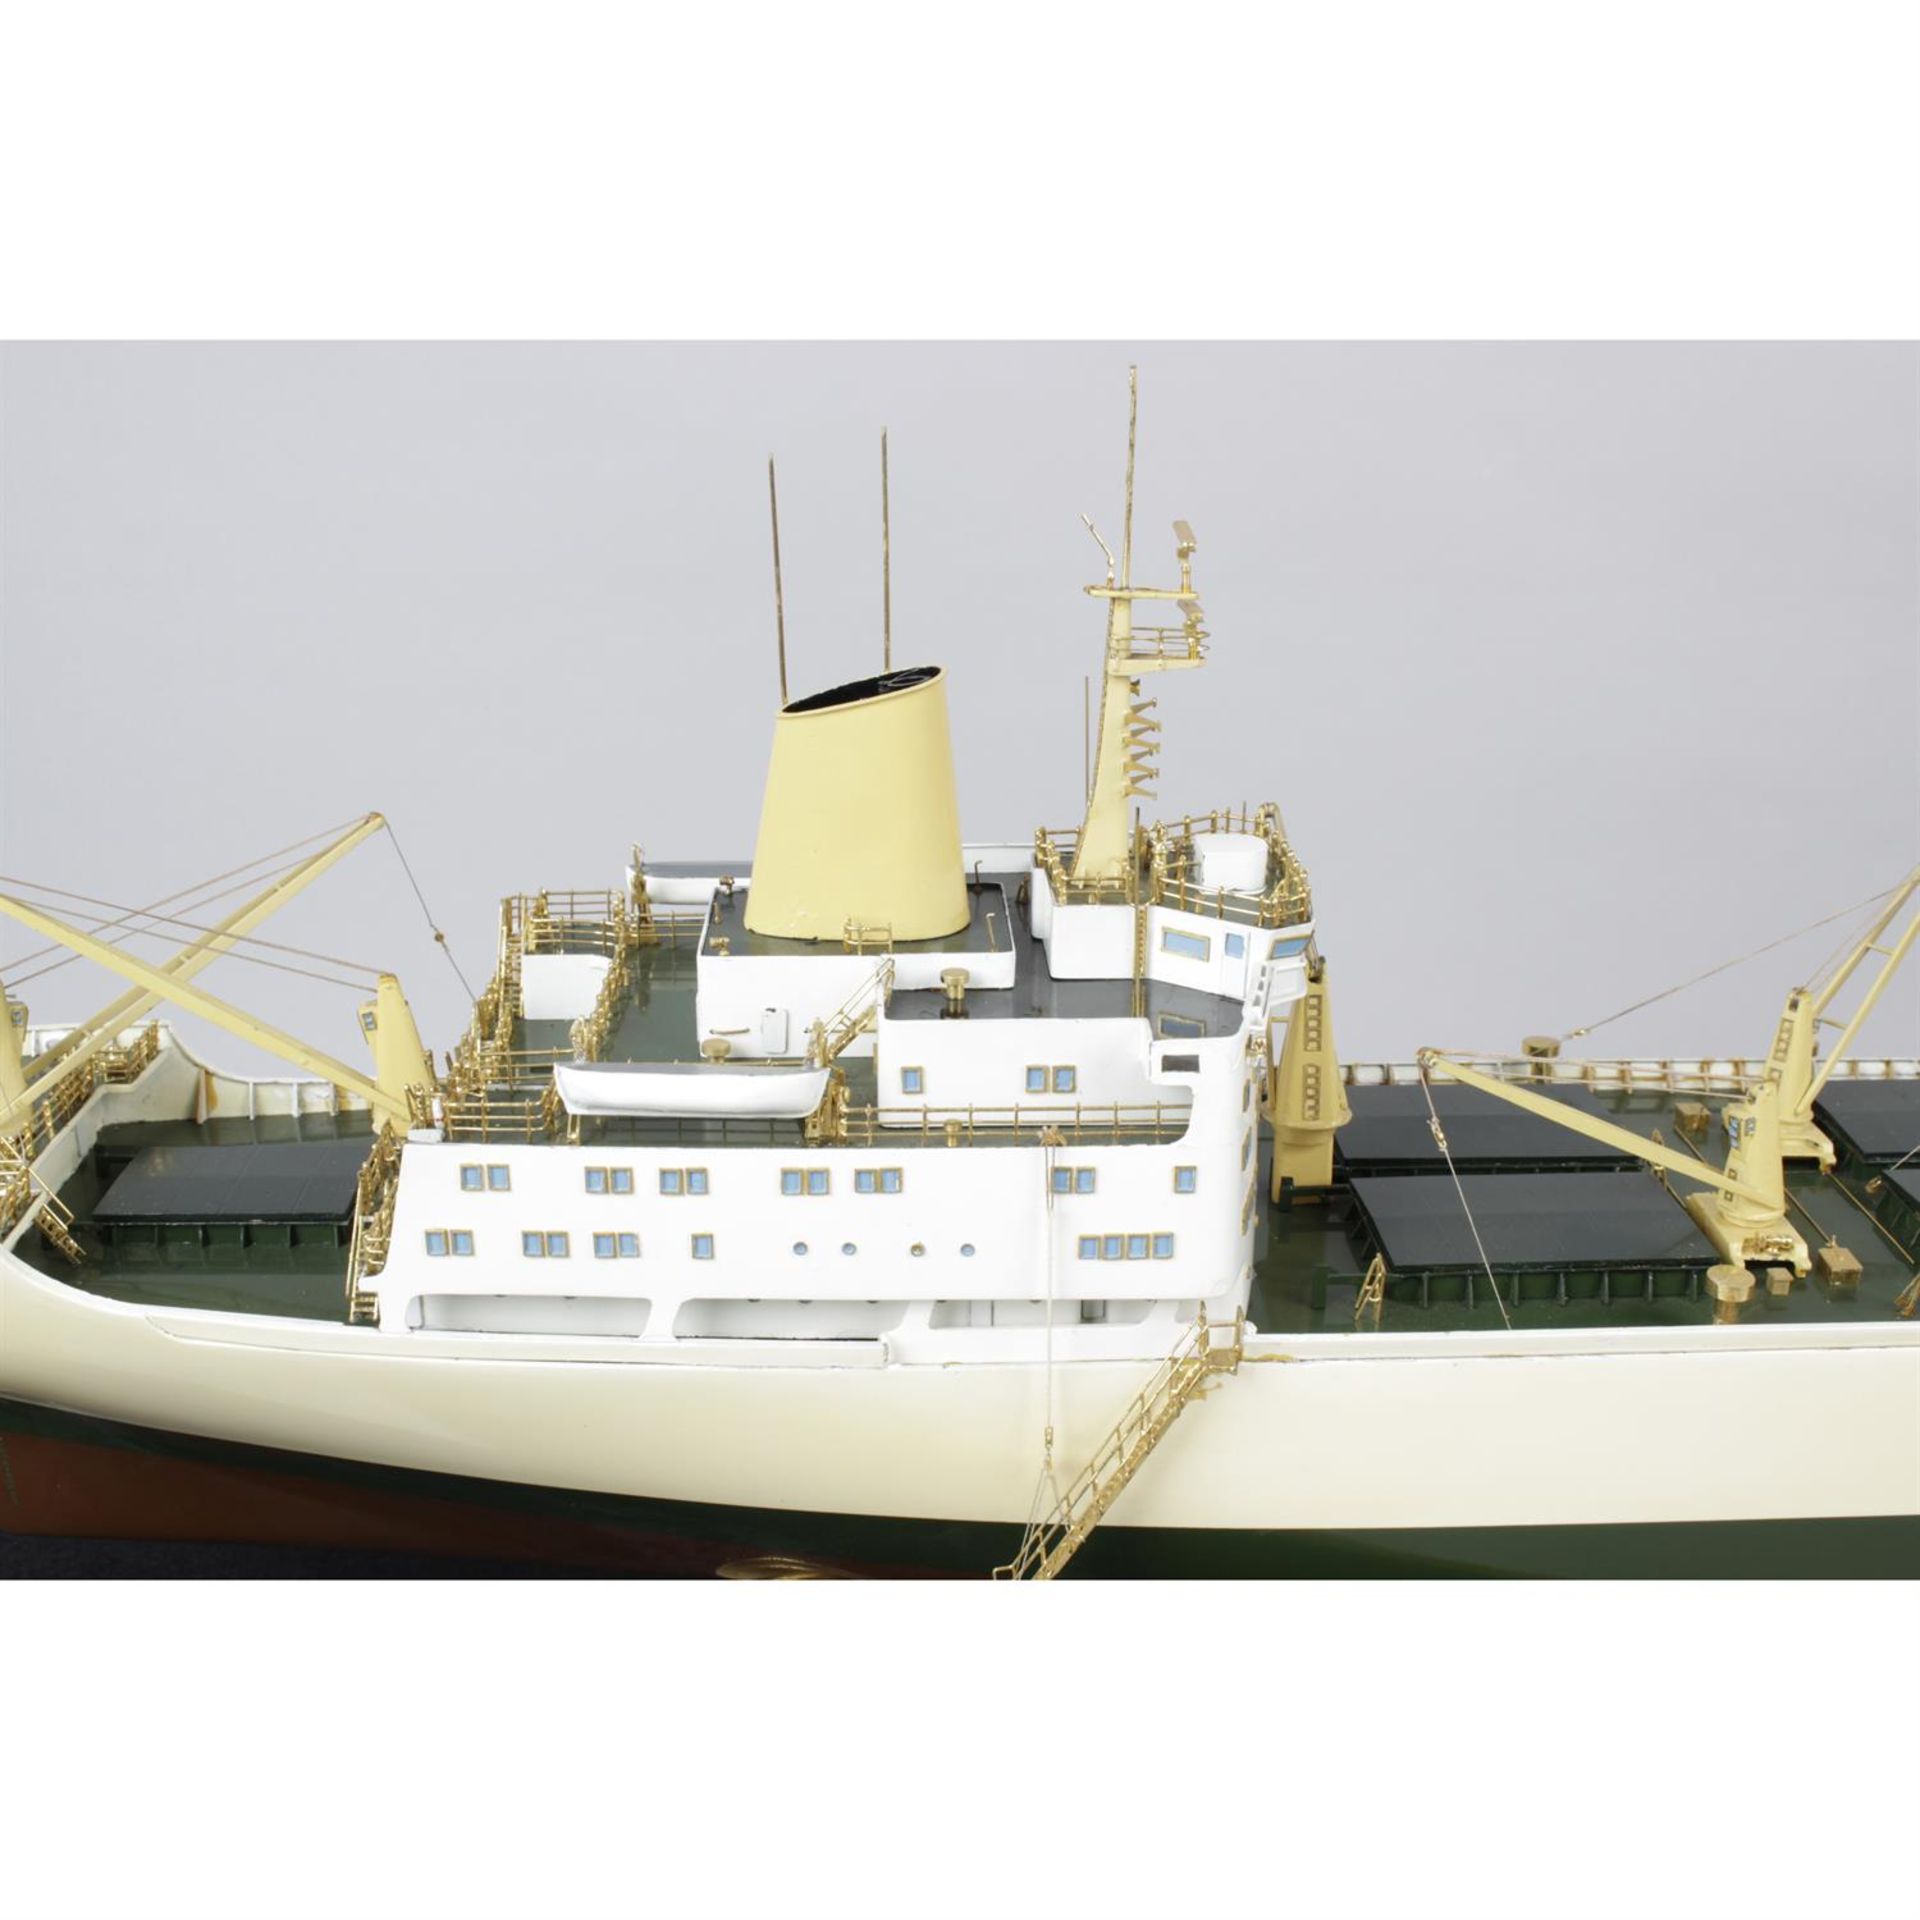 A fine boardroom or ship builders model of the Super High Speed Cargo Liner “Strathardle” of The - Image 2 of 5